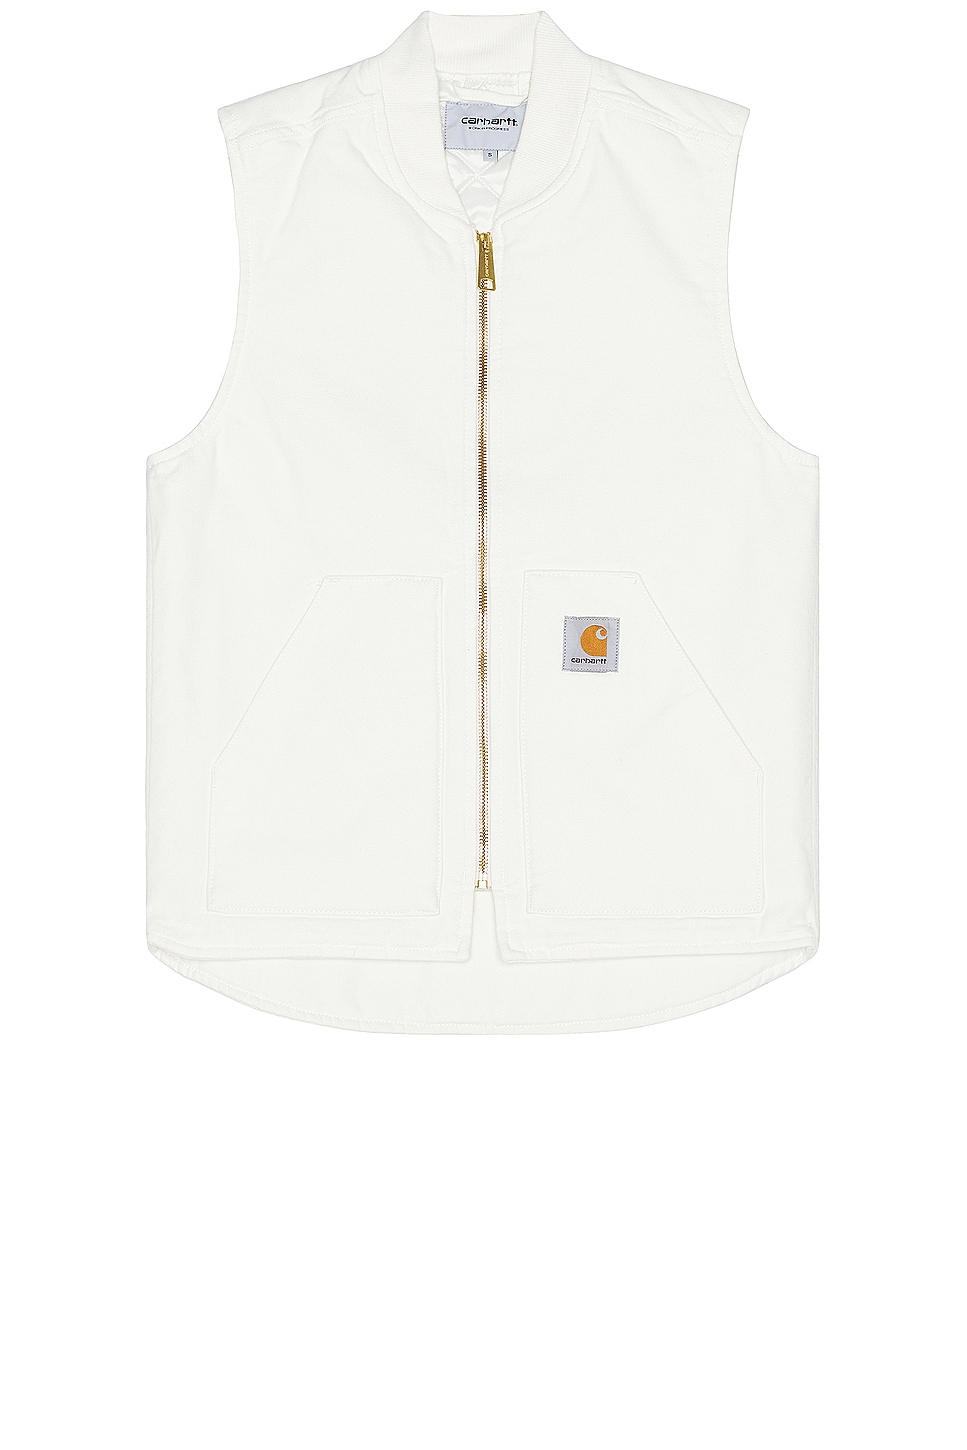 Image 1 of Carhartt WIP Classic Vest in Wax Ore